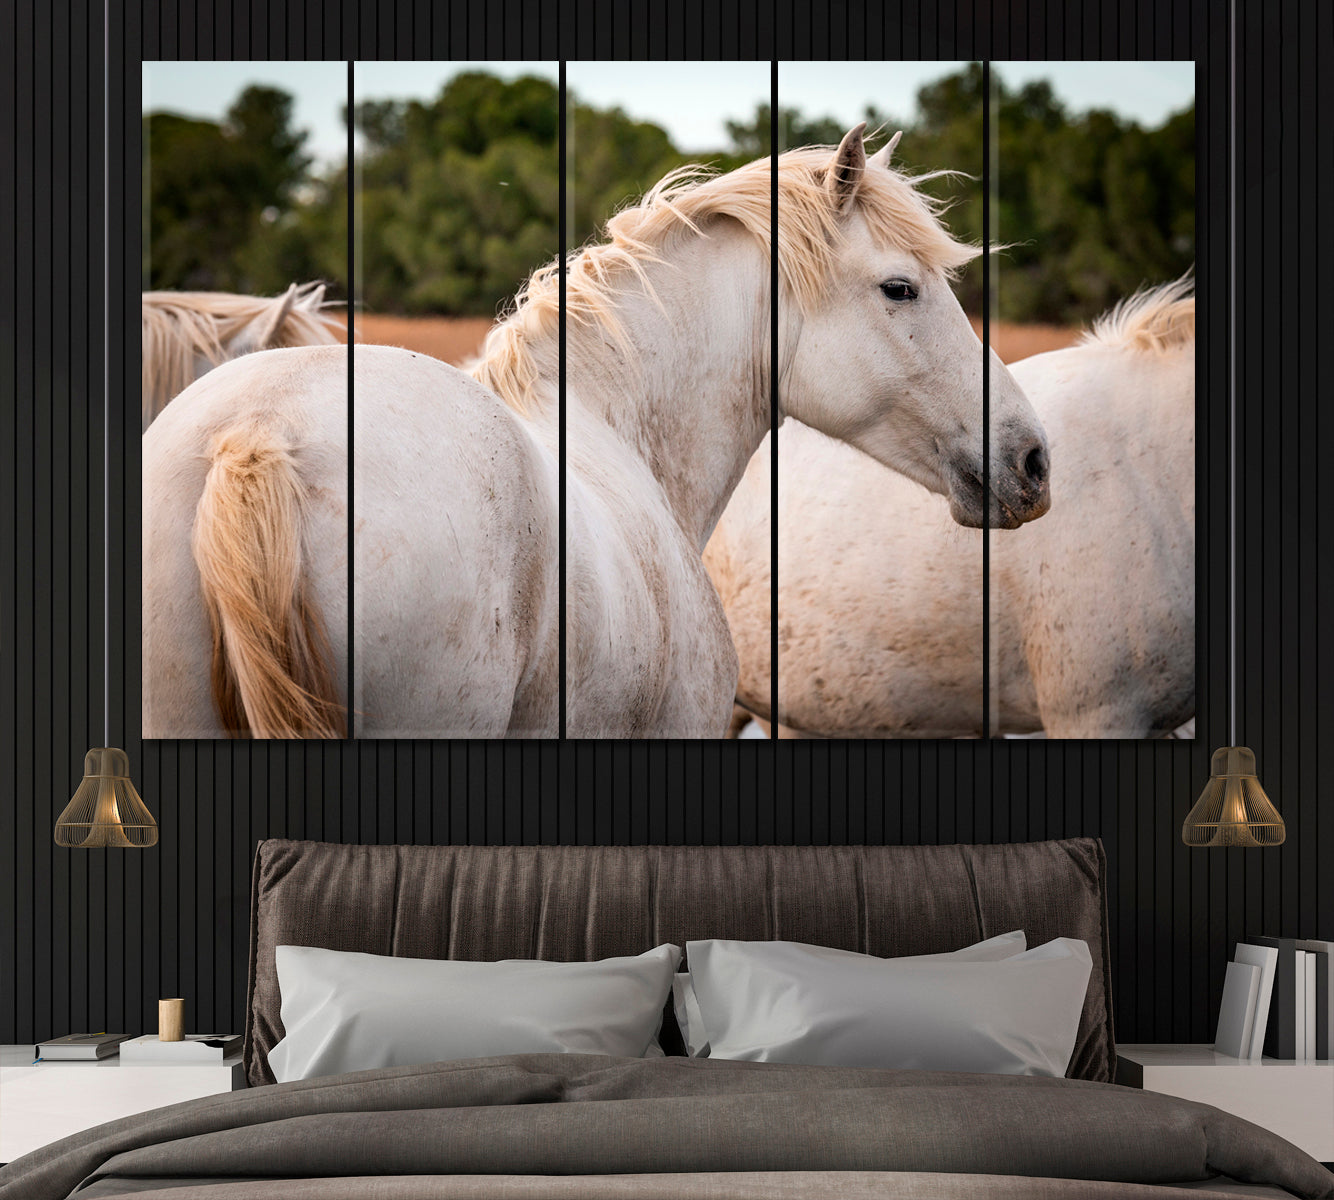 Herd of White Horses Camargue France Canvas Print ArtLexy 5 Panels 36"x24" inches 